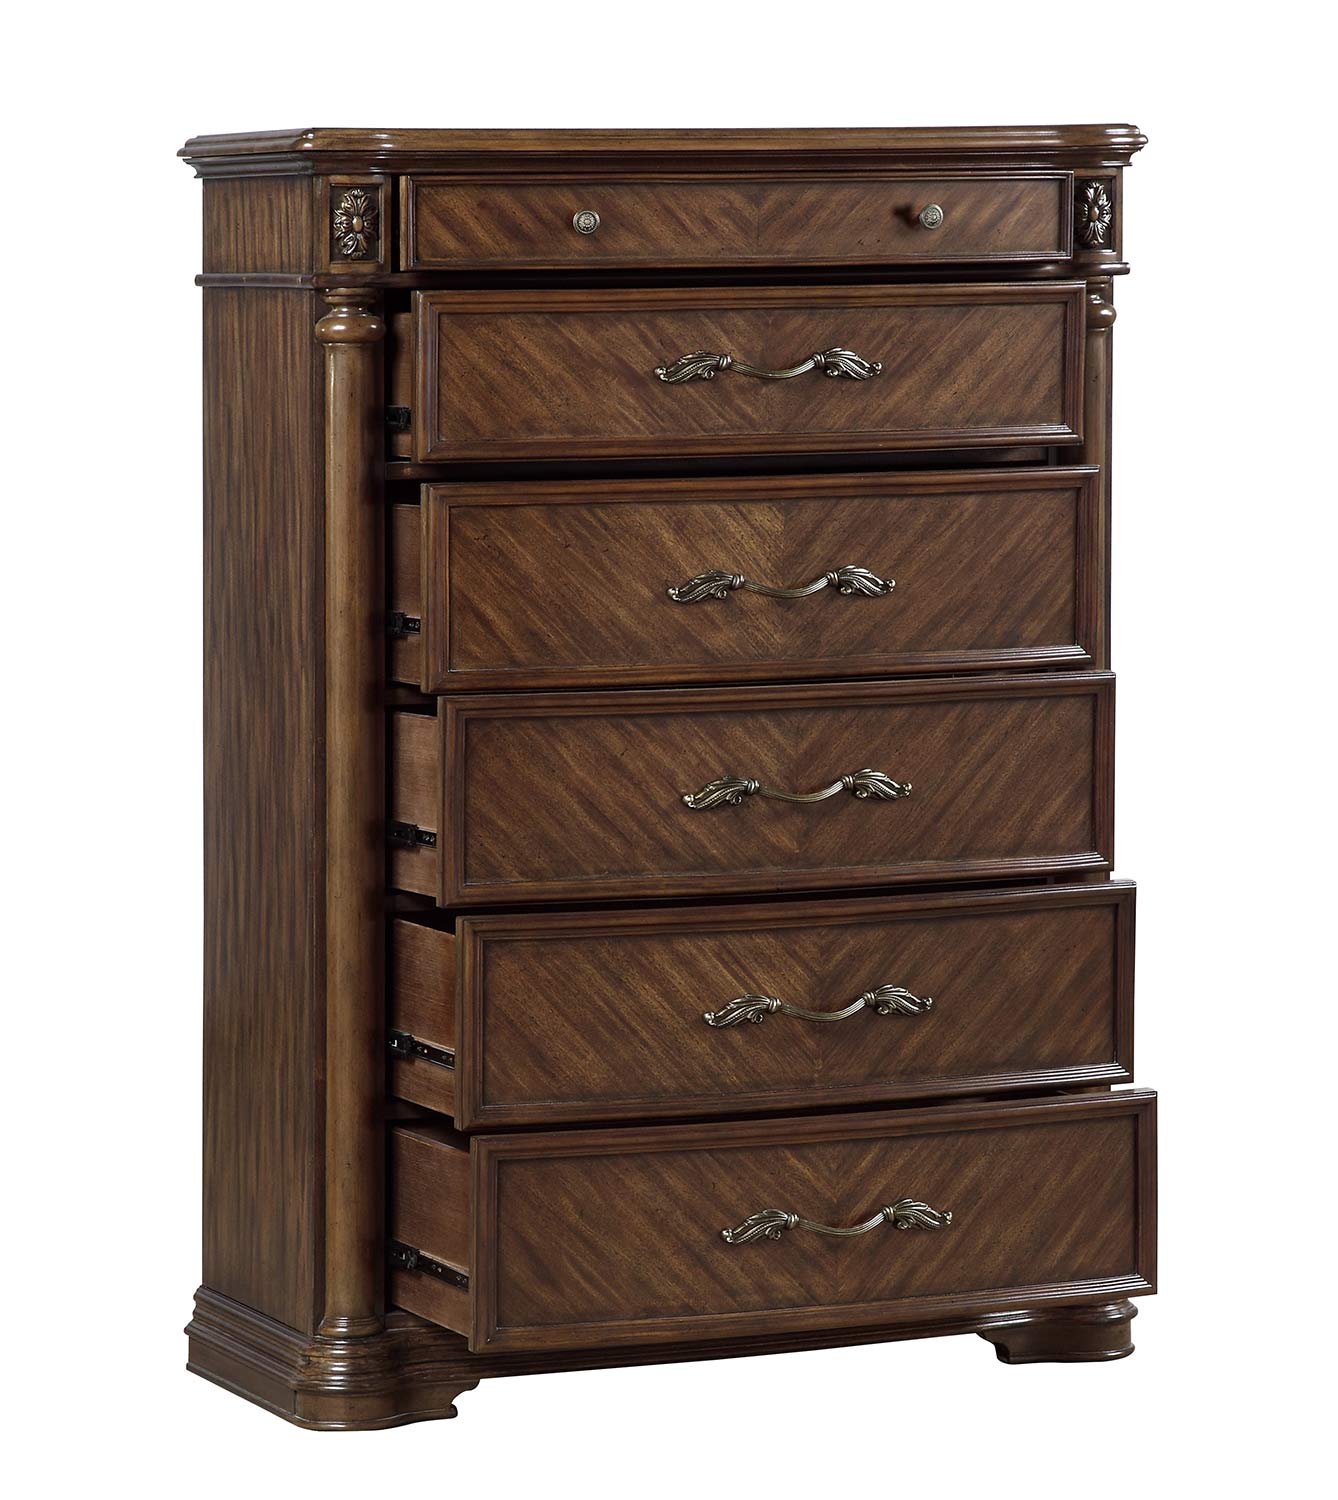 Homelegance Barbary Chest - Traditional Cherry